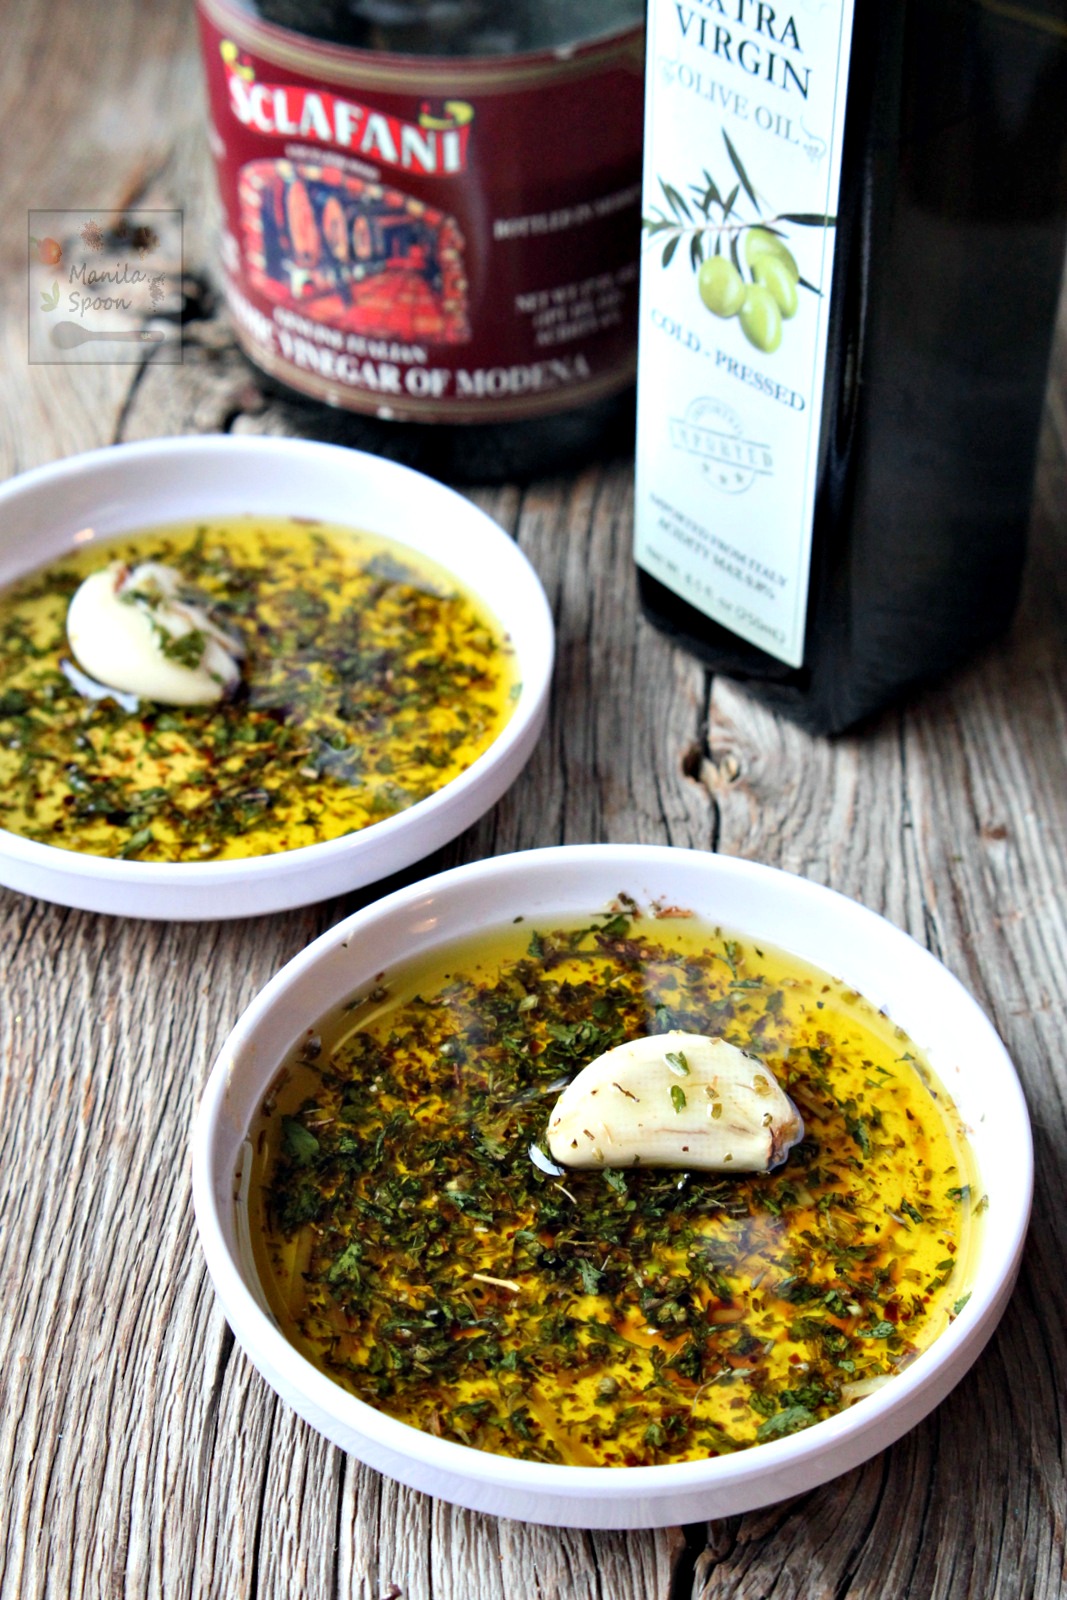 Restaurant-style sauce with Italian herbs and balsamic vinegar perfect for dipping your favorite crusty bread. Mix it up with your favorite herbs and add a spicy kick to create your own flavor blend. Italian Bread Dipping Oil (Sauce) | manilaspoon.com